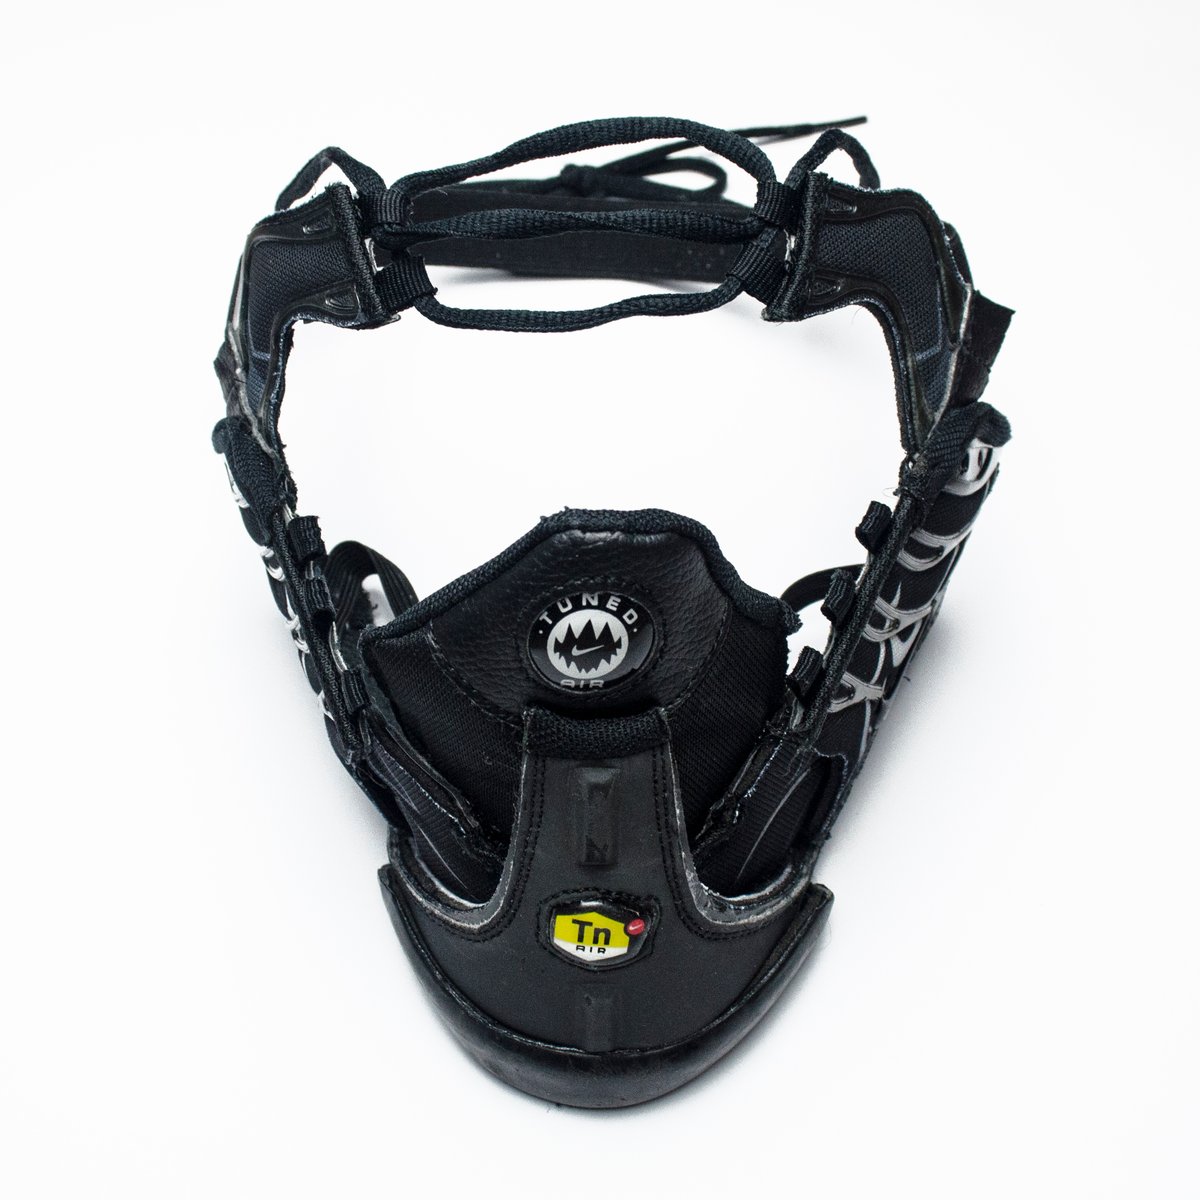 Image of SNEAKER MASK / HEAD PIECE / BLACK / WHITE / REFLECTIVE